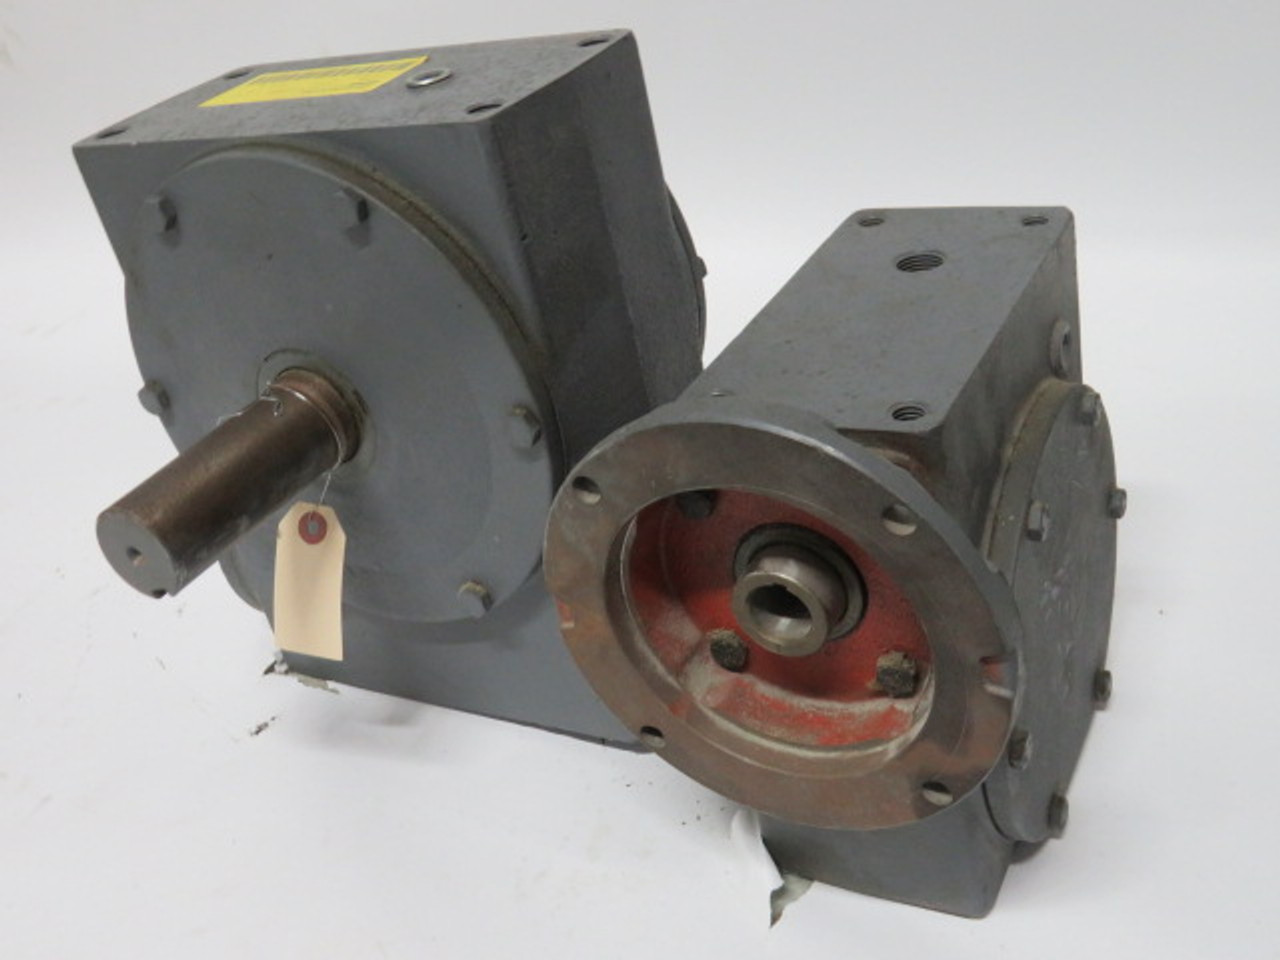 Hub City 0220-70793-450 Gear Reducer Assembly 200:1 Ratio USED